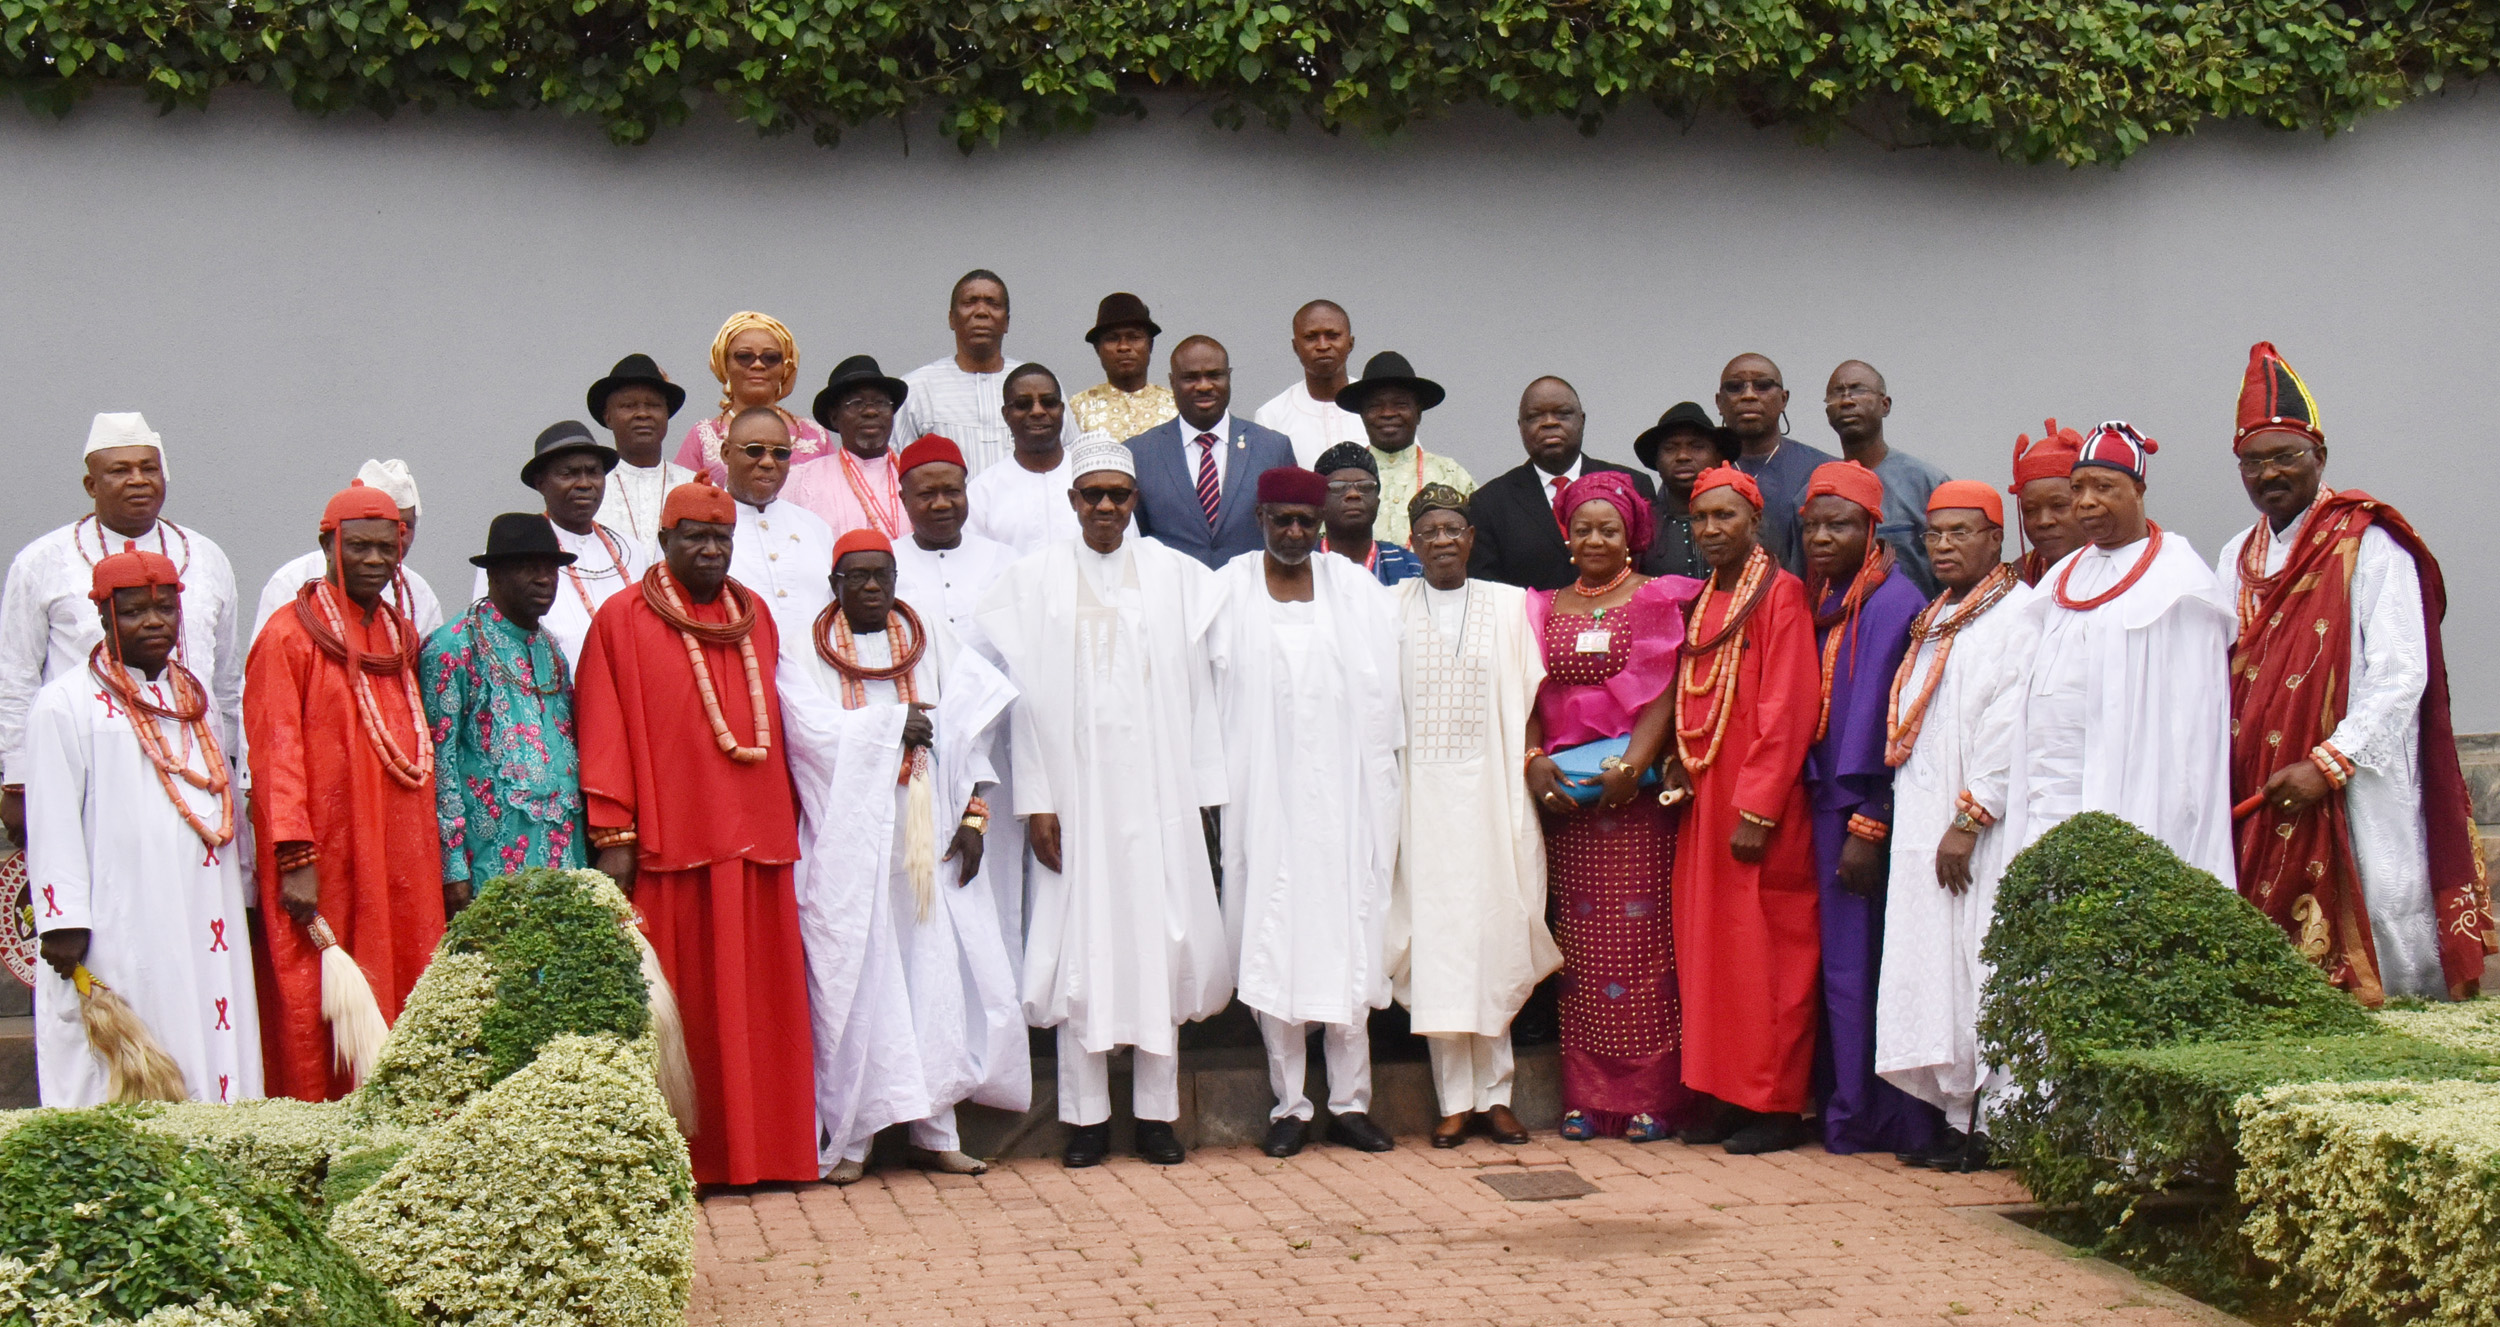 President Muhammadu Buahri (6th L); Minister of Informational and Culture, Alhaji Lai Mohammed (7th R); Chief of Staff, Alhaji Abba Kyari and members of Isoko Traditional Rulers Council during their visit to  the Presidential Villa in Abuja on Friday (27/7/18).
04042/27/8/2018/BJO/NAN